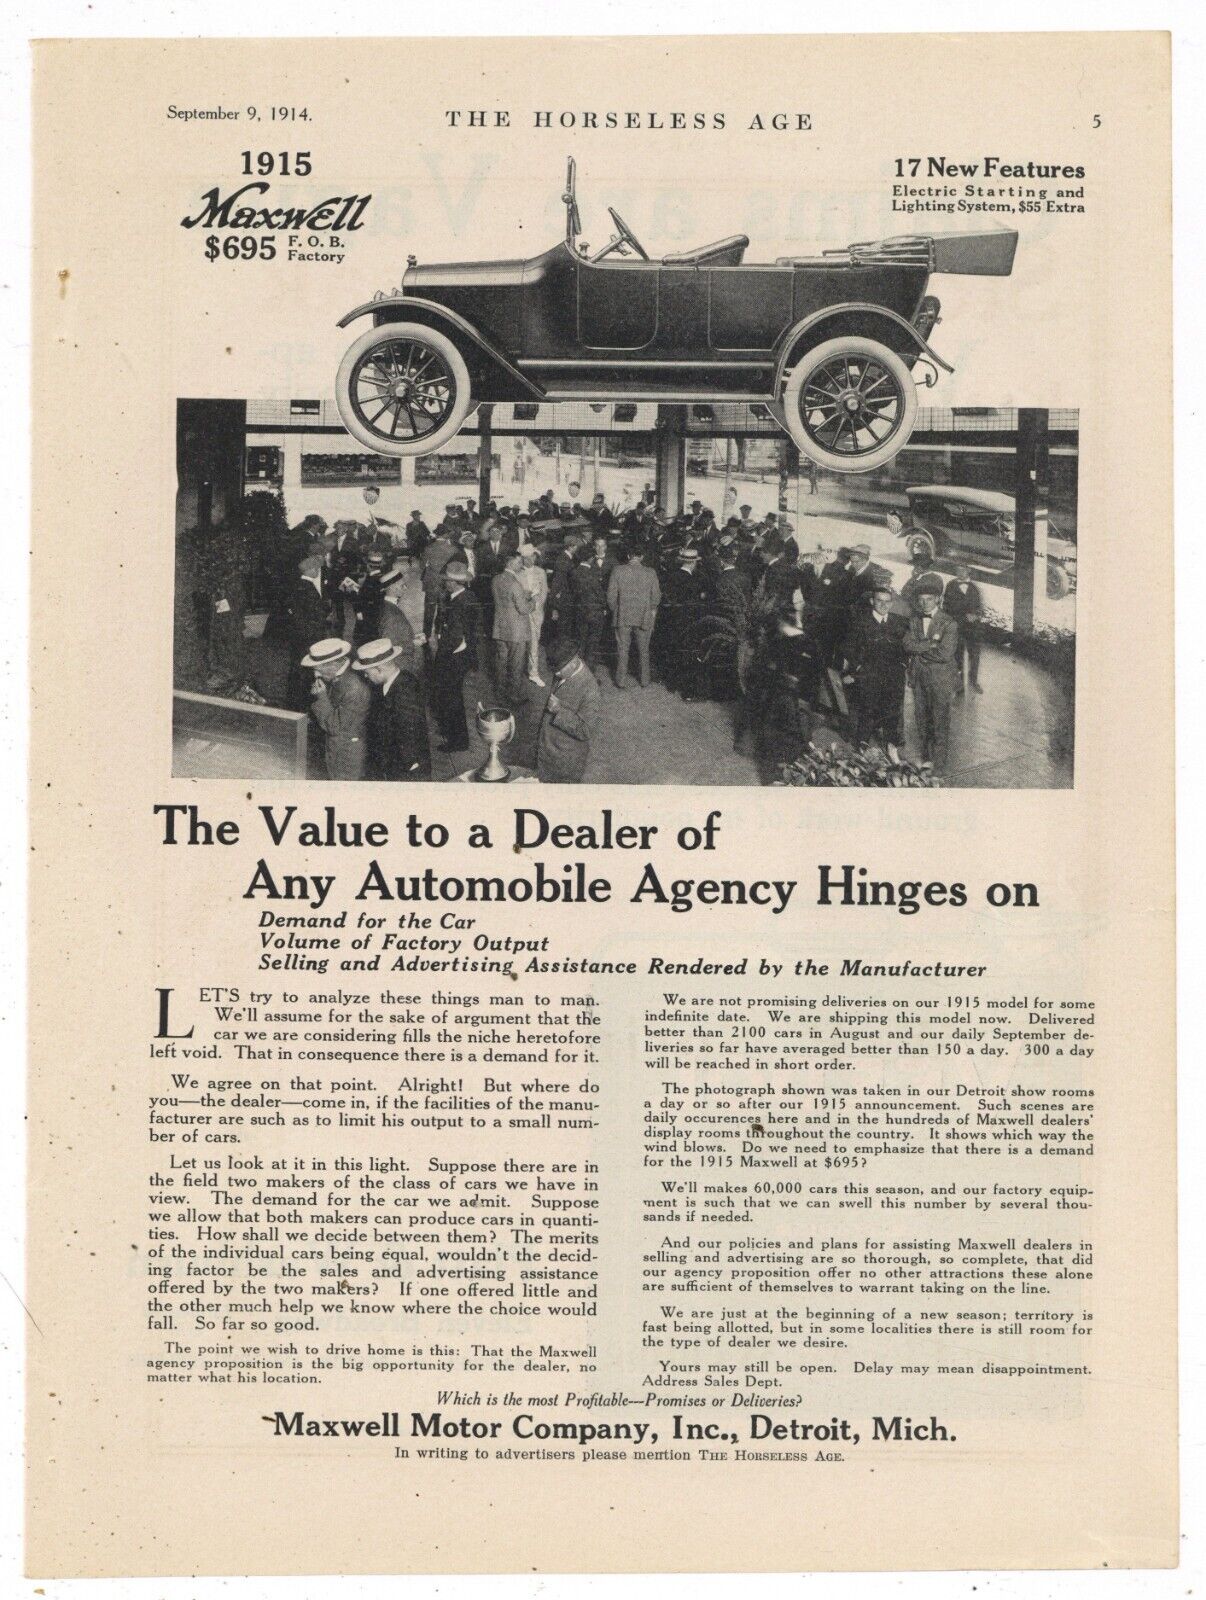 1914/15 Maxwell Motor Co. Ad: Interior of Detroit Dealership Showroom Pictured